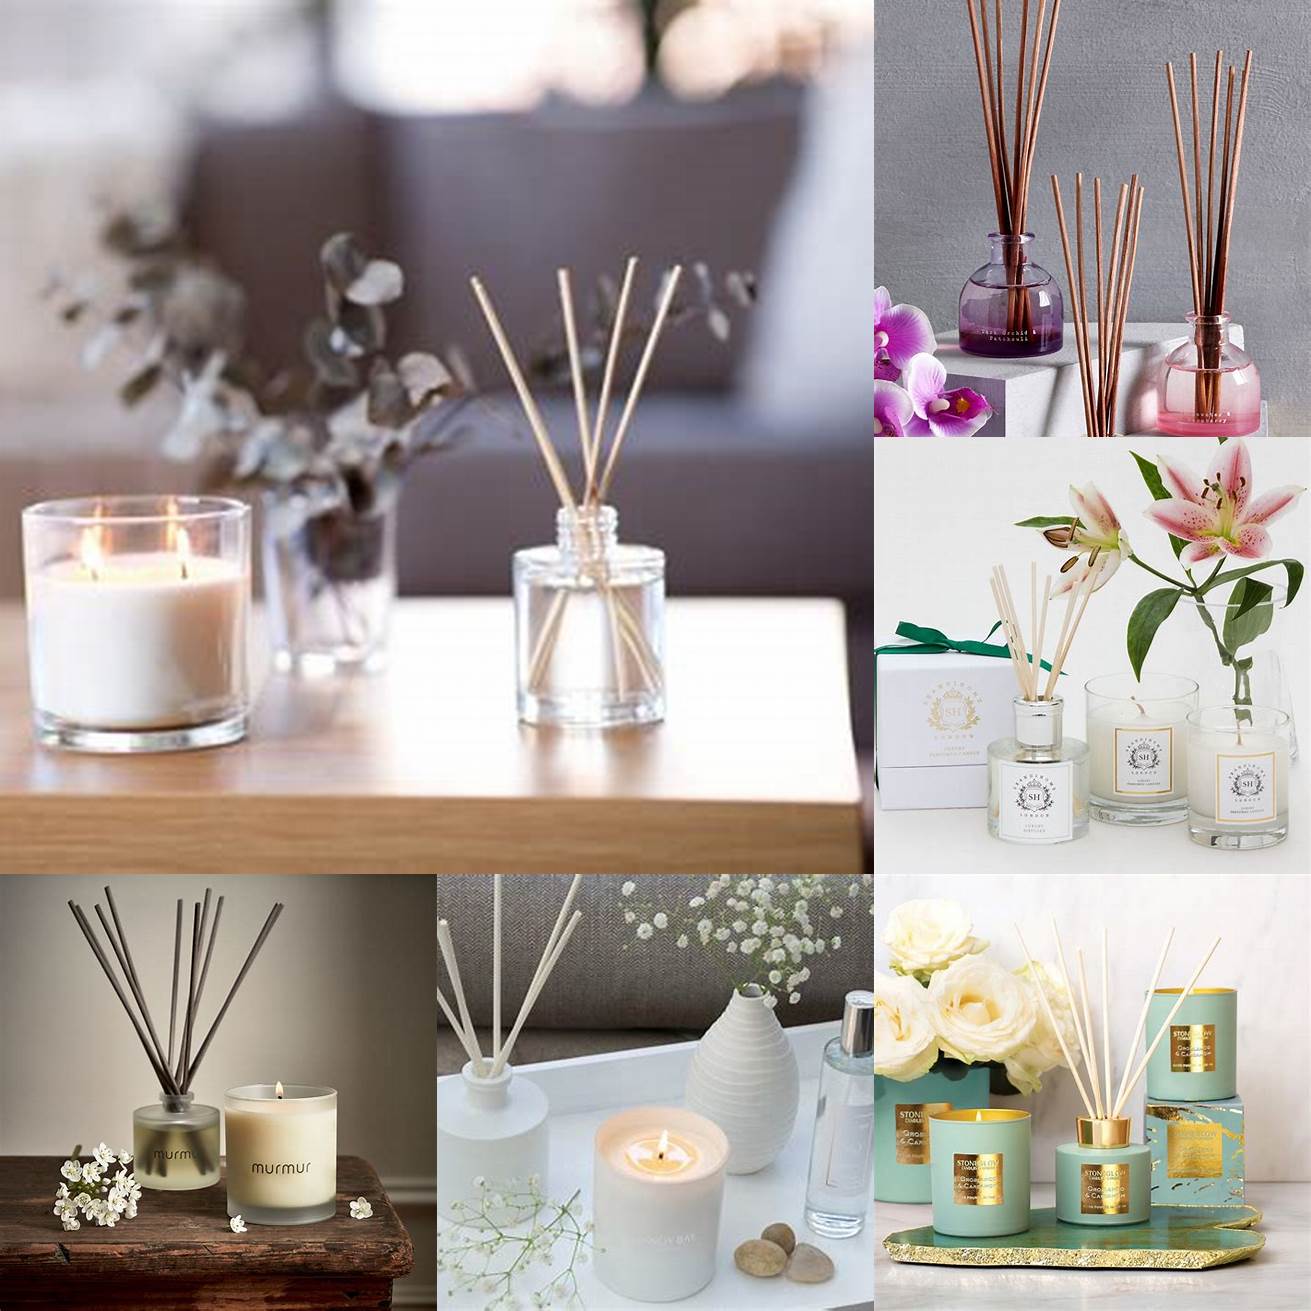 Candles and diffusers Fragrant candles and diffusers can create a relaxing atmosphere in any room